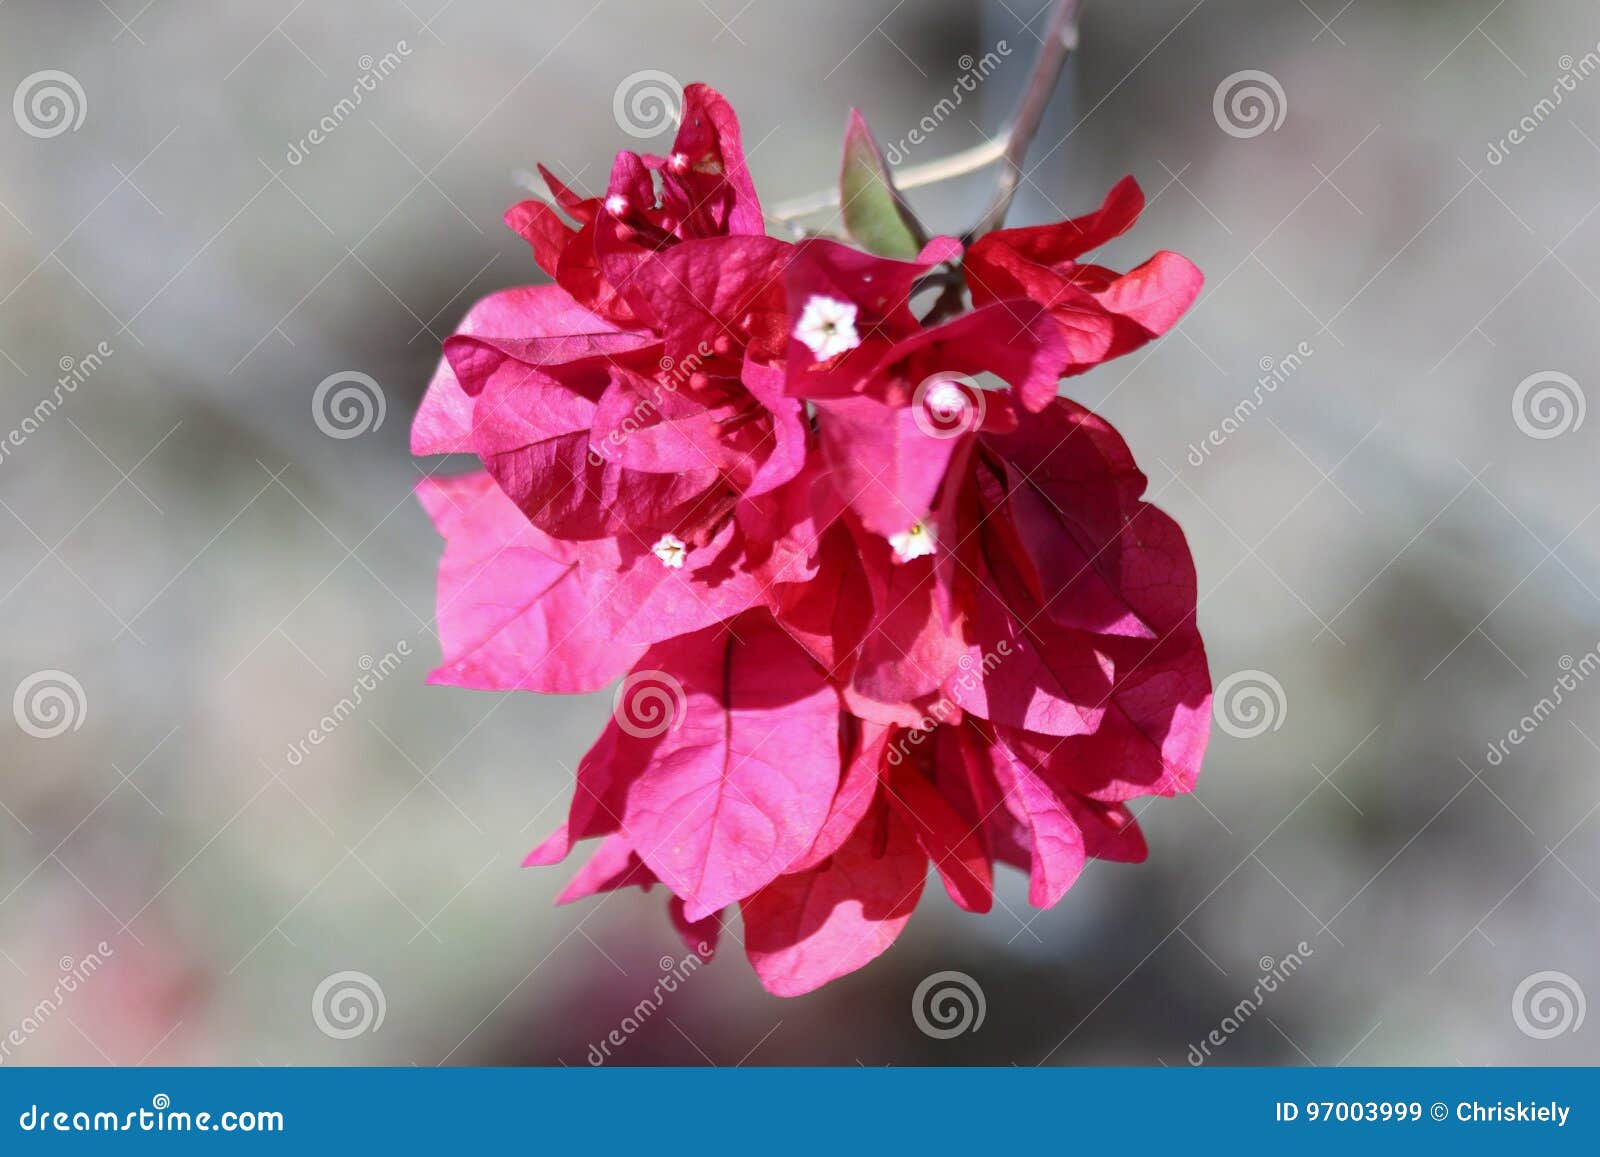 Bouganvillea Flower stock image. Image of grow, forth - 97003999